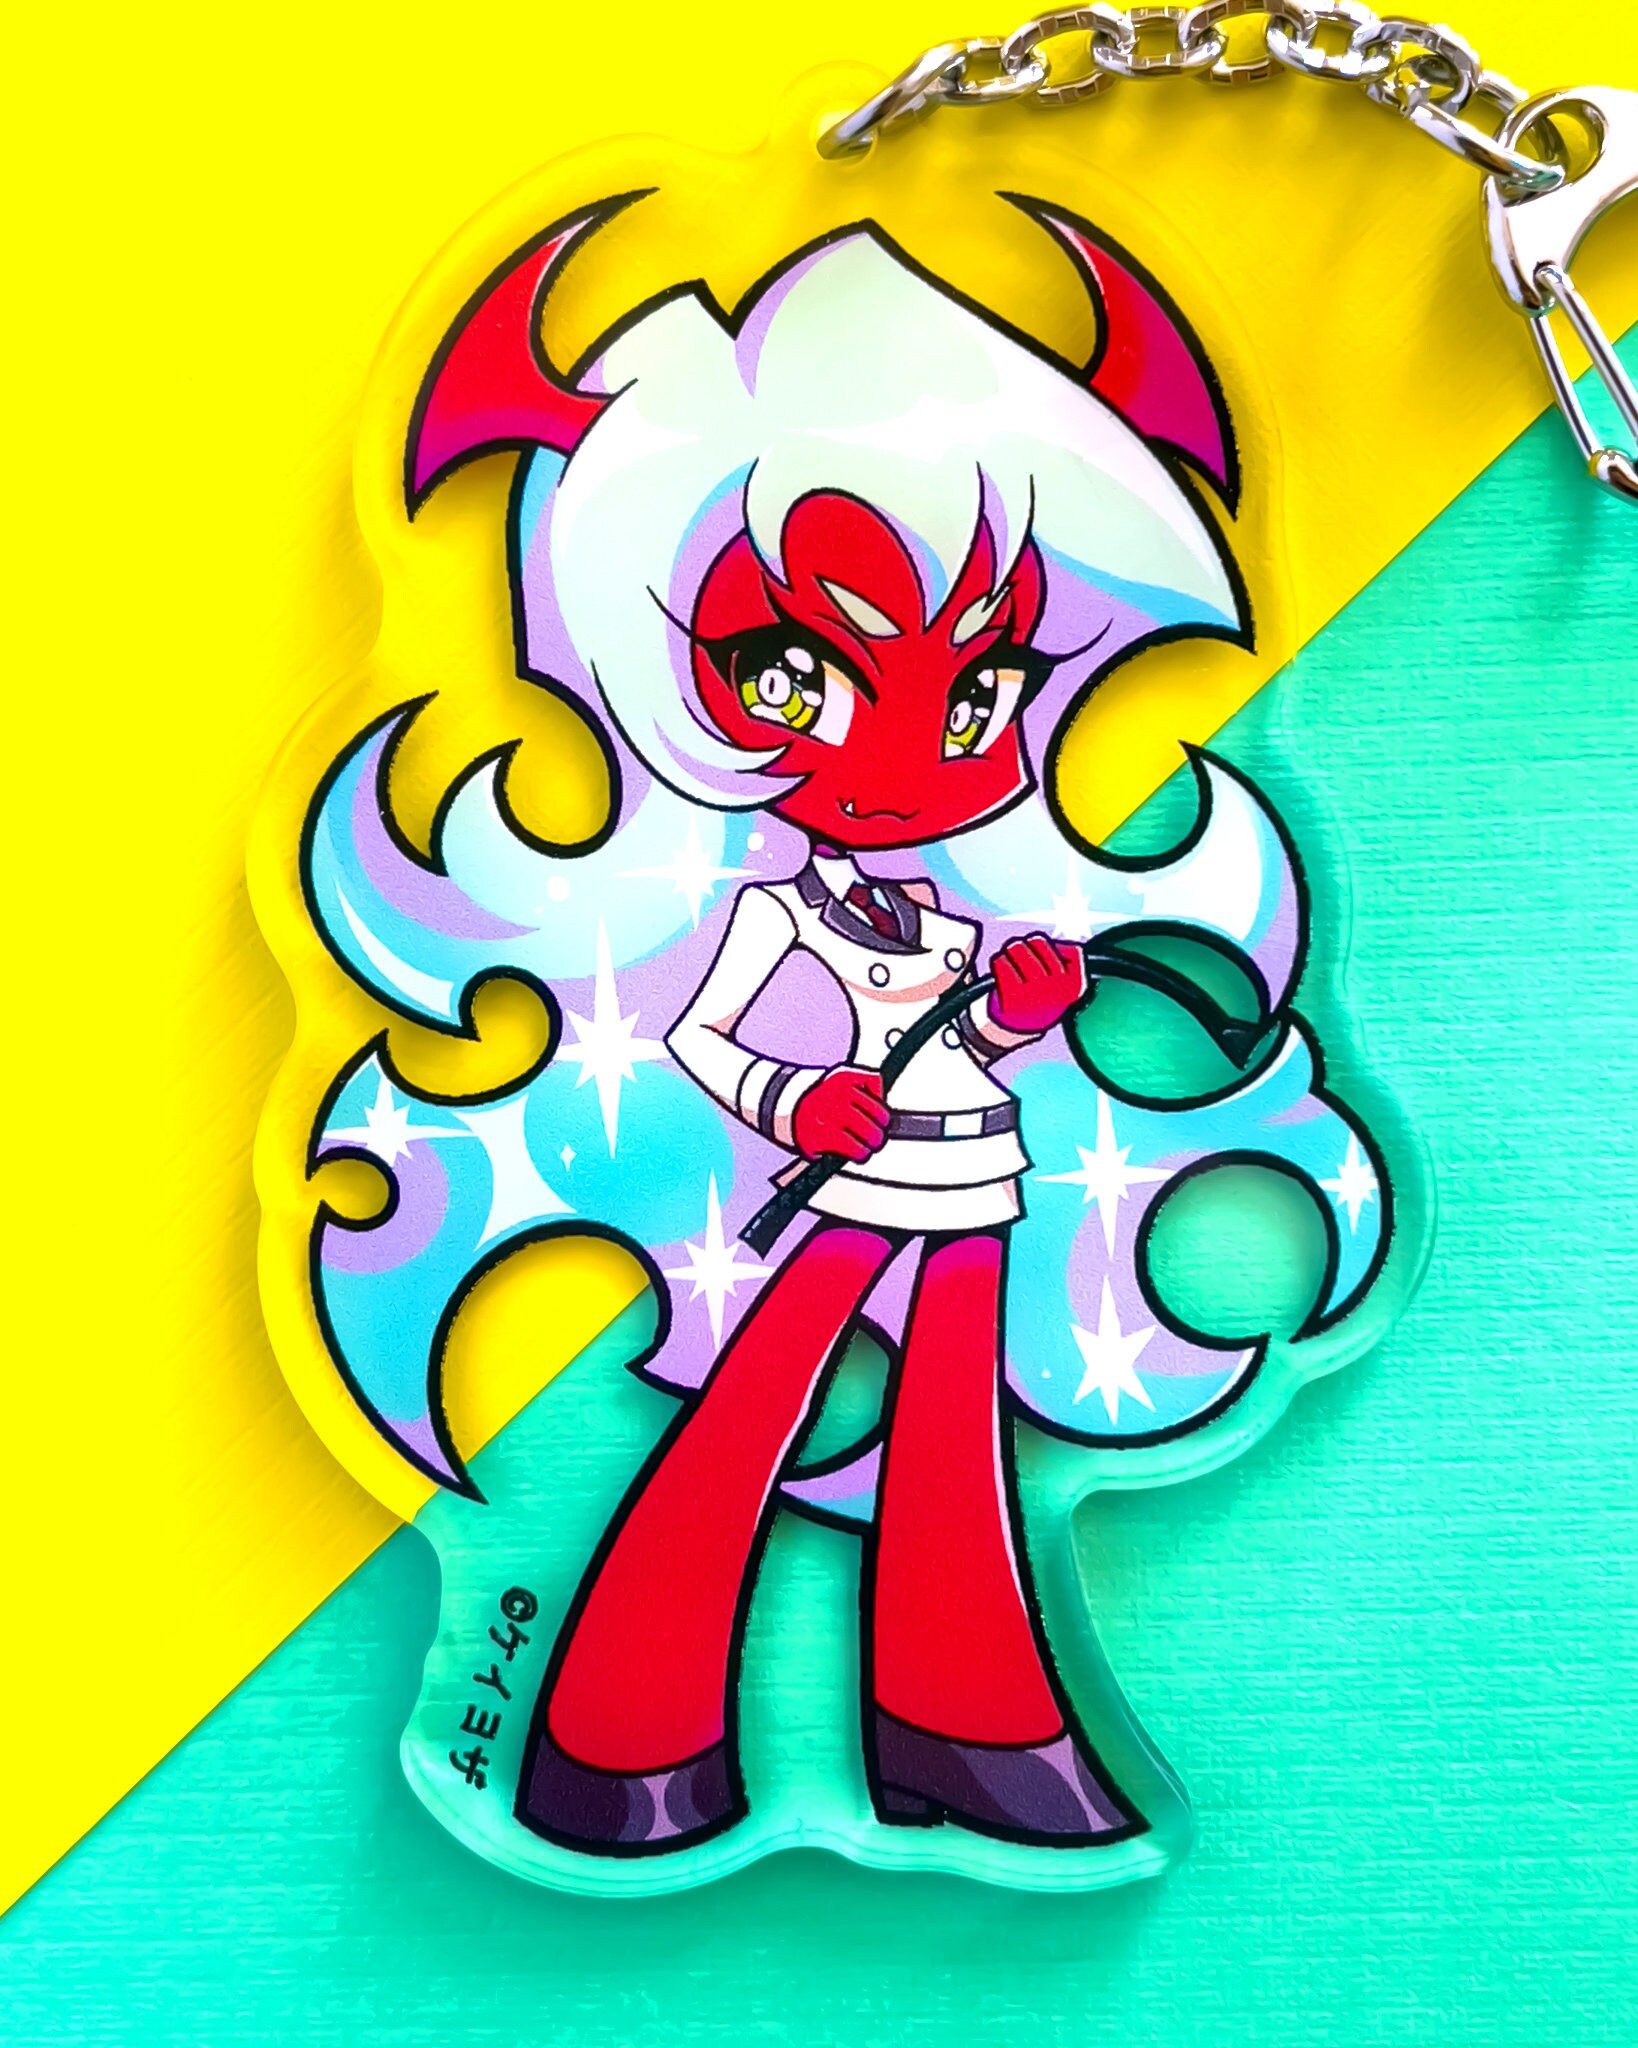 Panty and stocking scanty